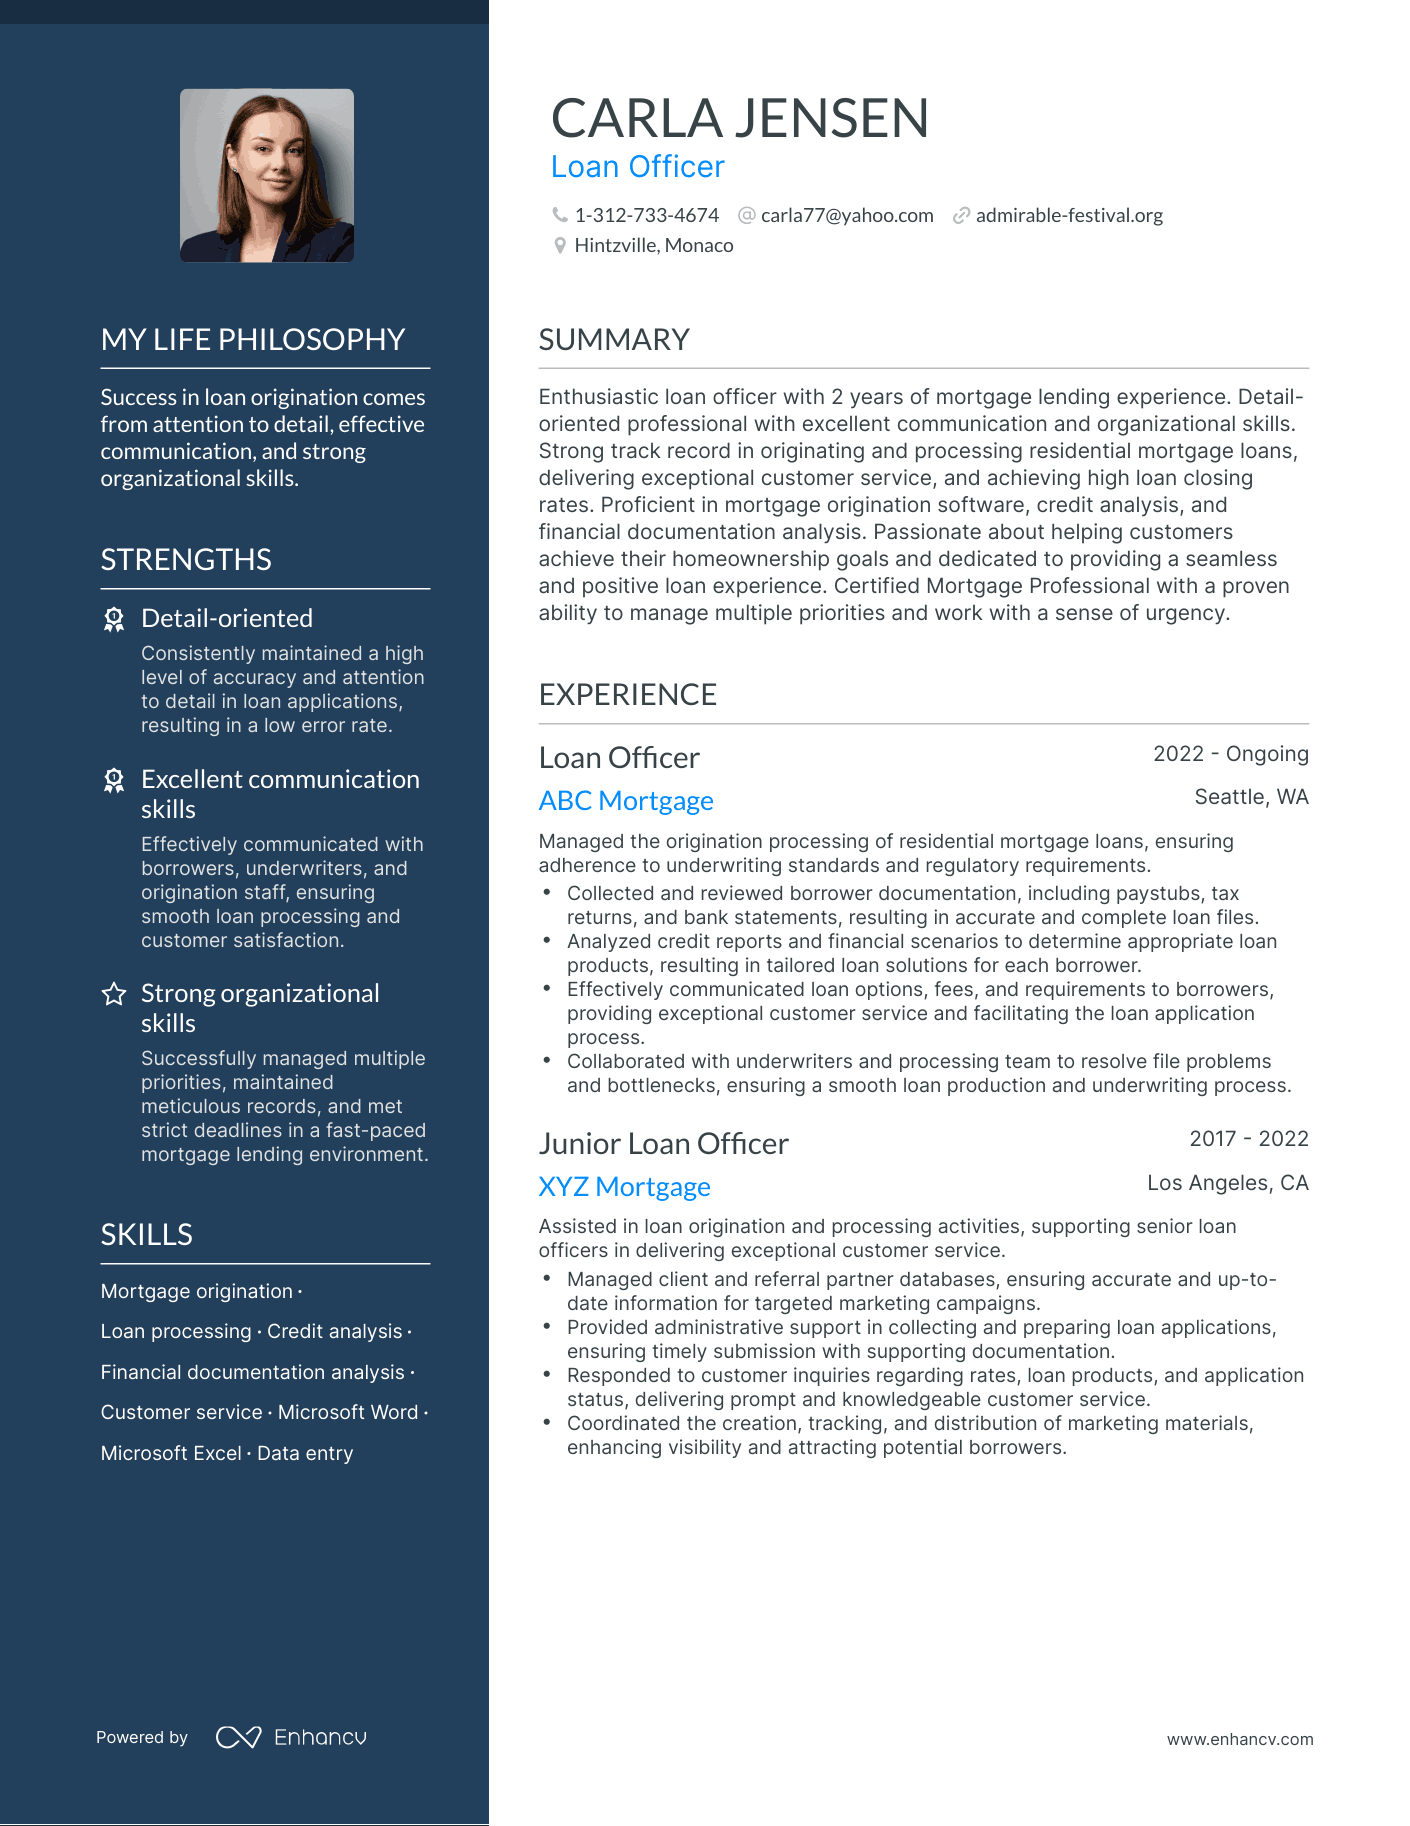 Loan Officer resume example